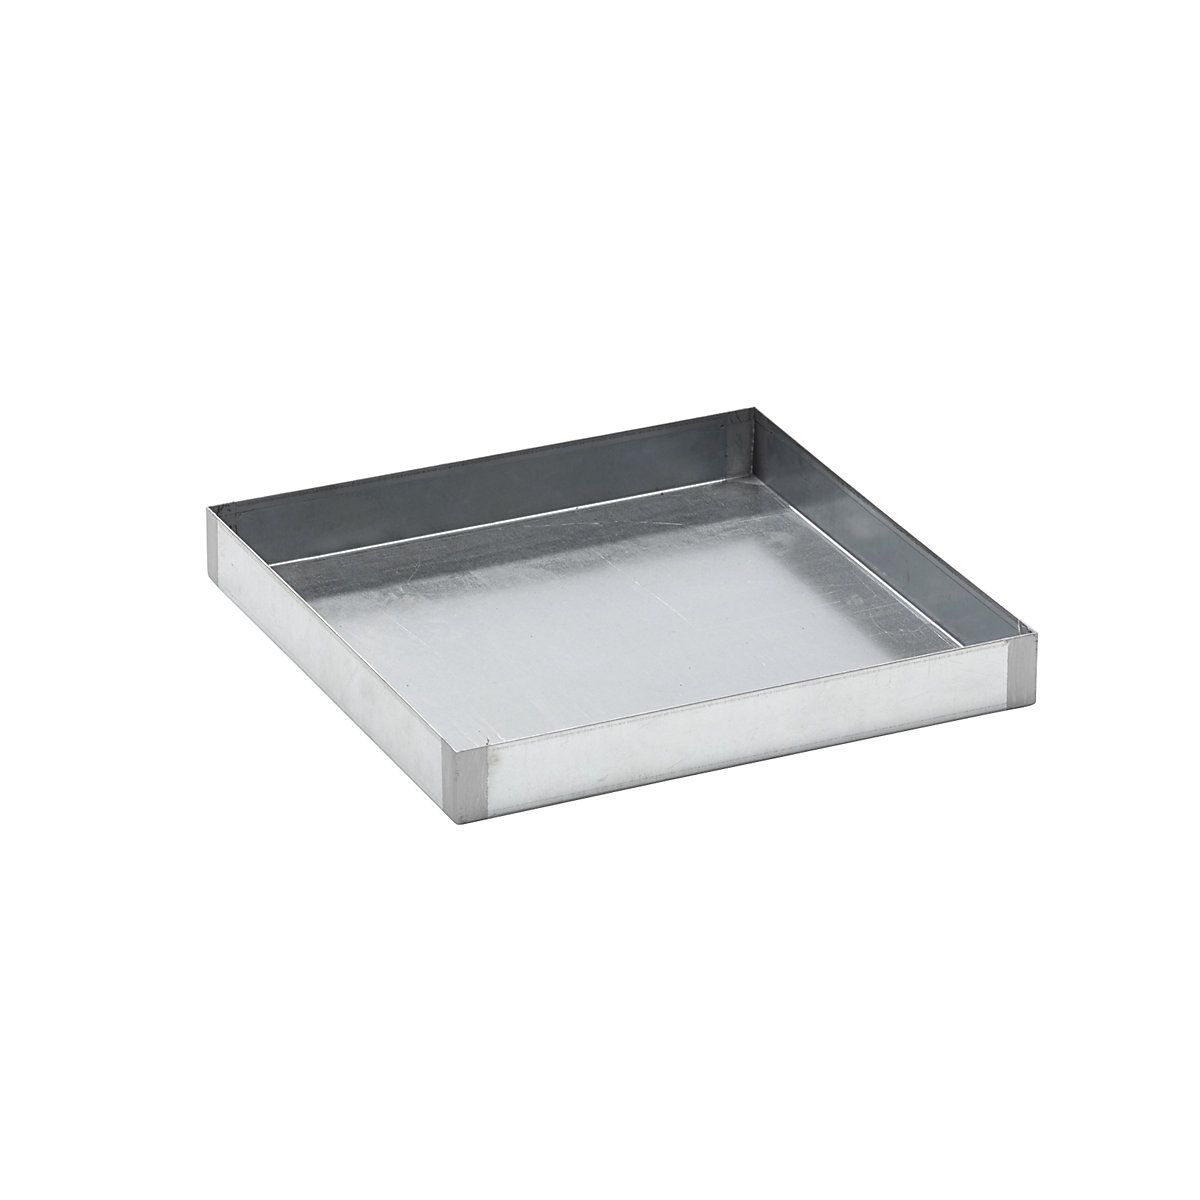 Steel sump tray for small containers - eurokraft basic